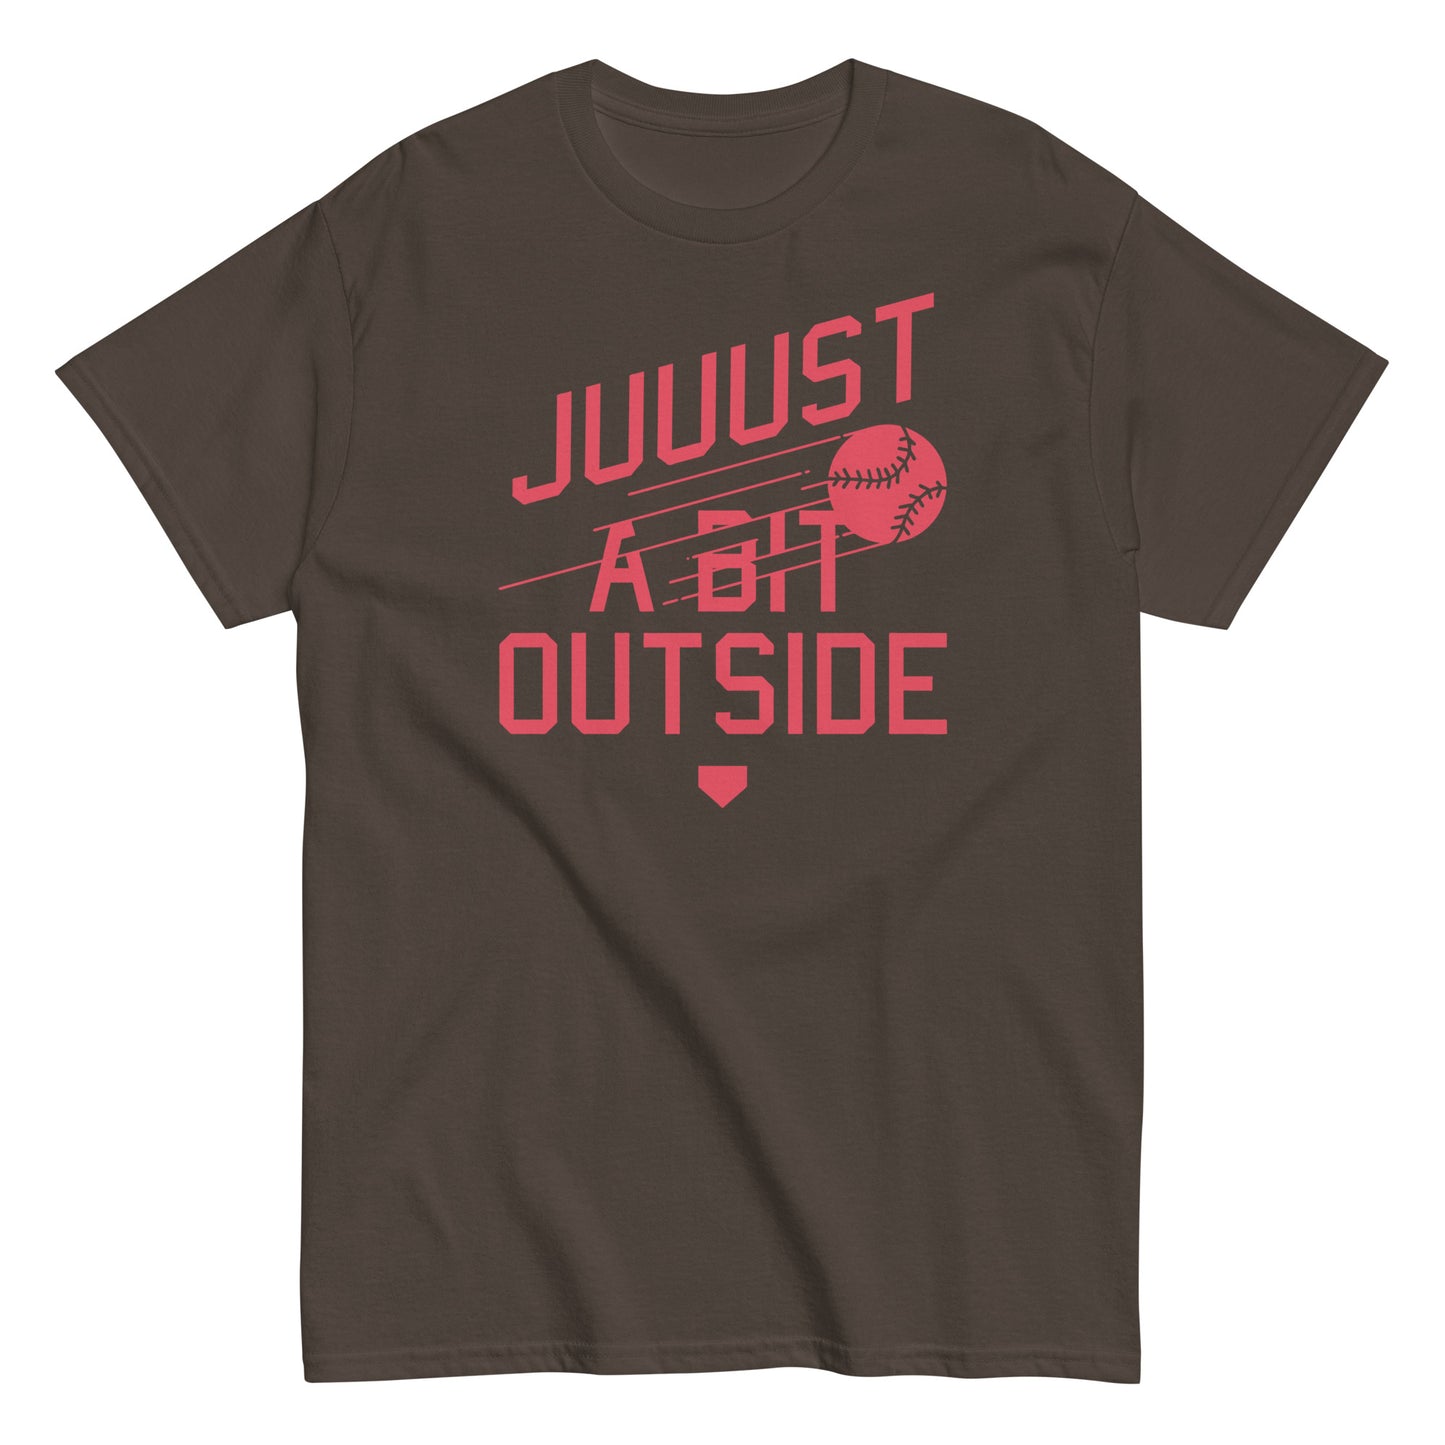 Just A Bit Outside Men's Classic Tee